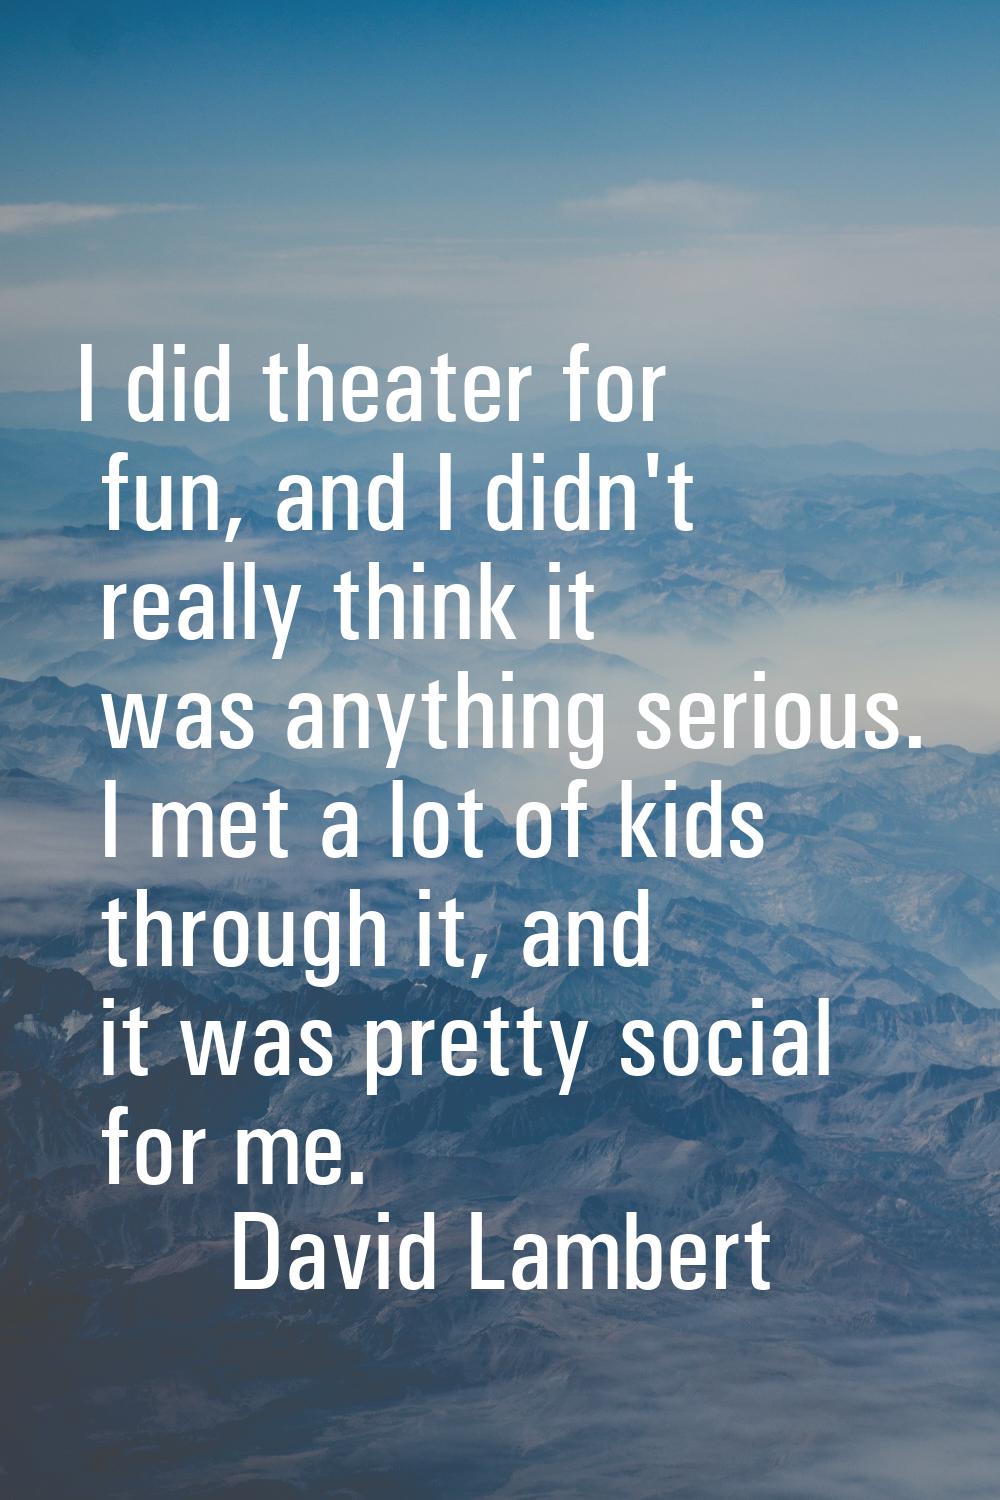 I did theater for fun, and I didn't really think it was anything serious. I met a lot of kids throu